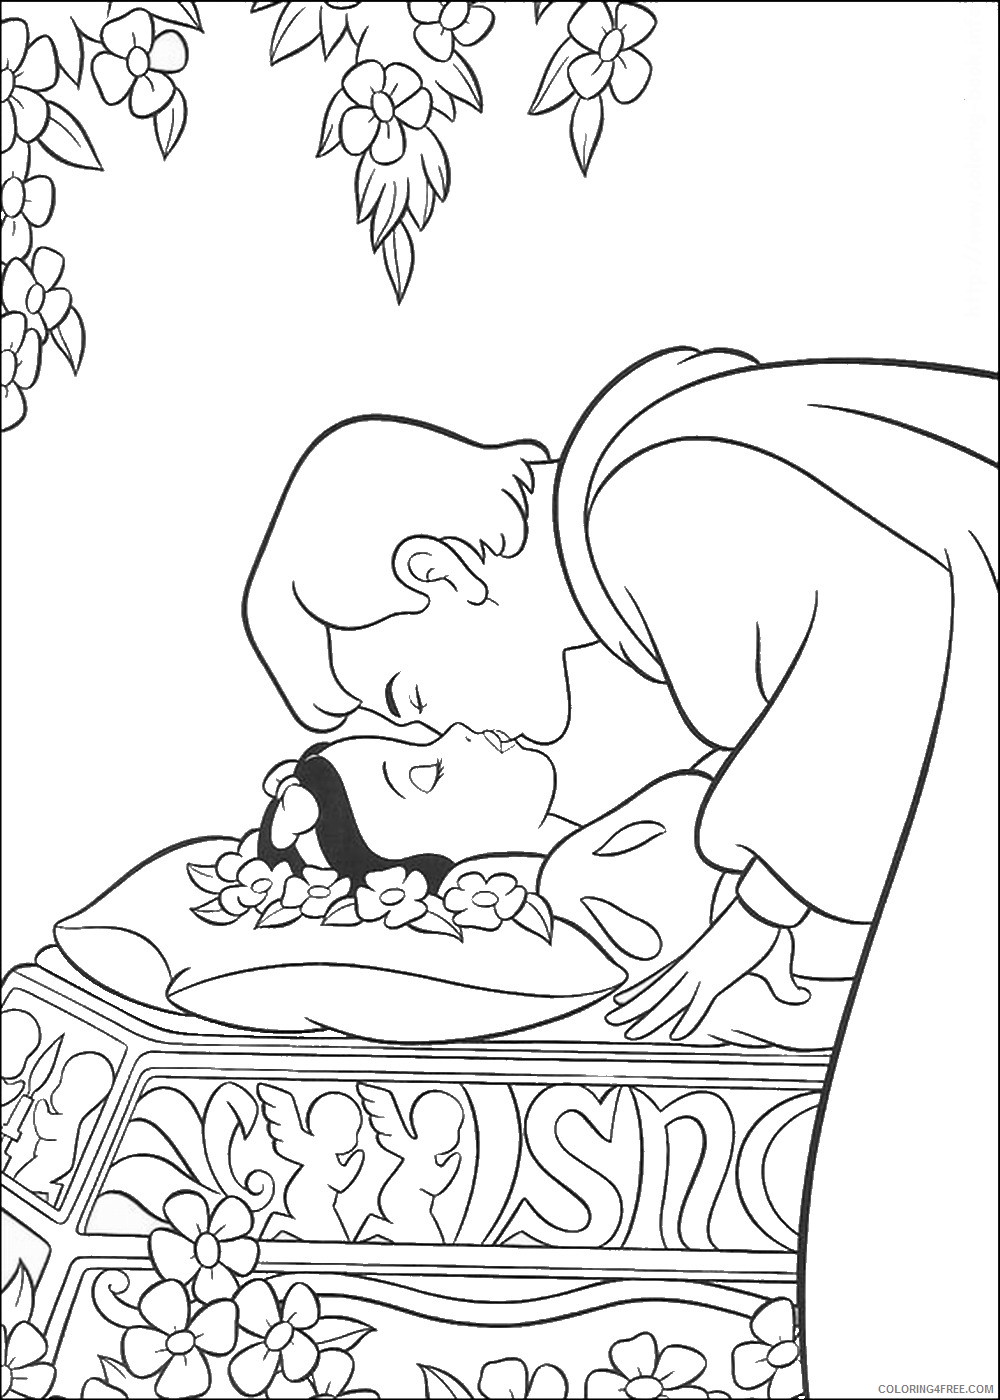 Snow White Coloring Pages Cartoons snow_white_cl_74 Printable 2020 5749 Coloring4free